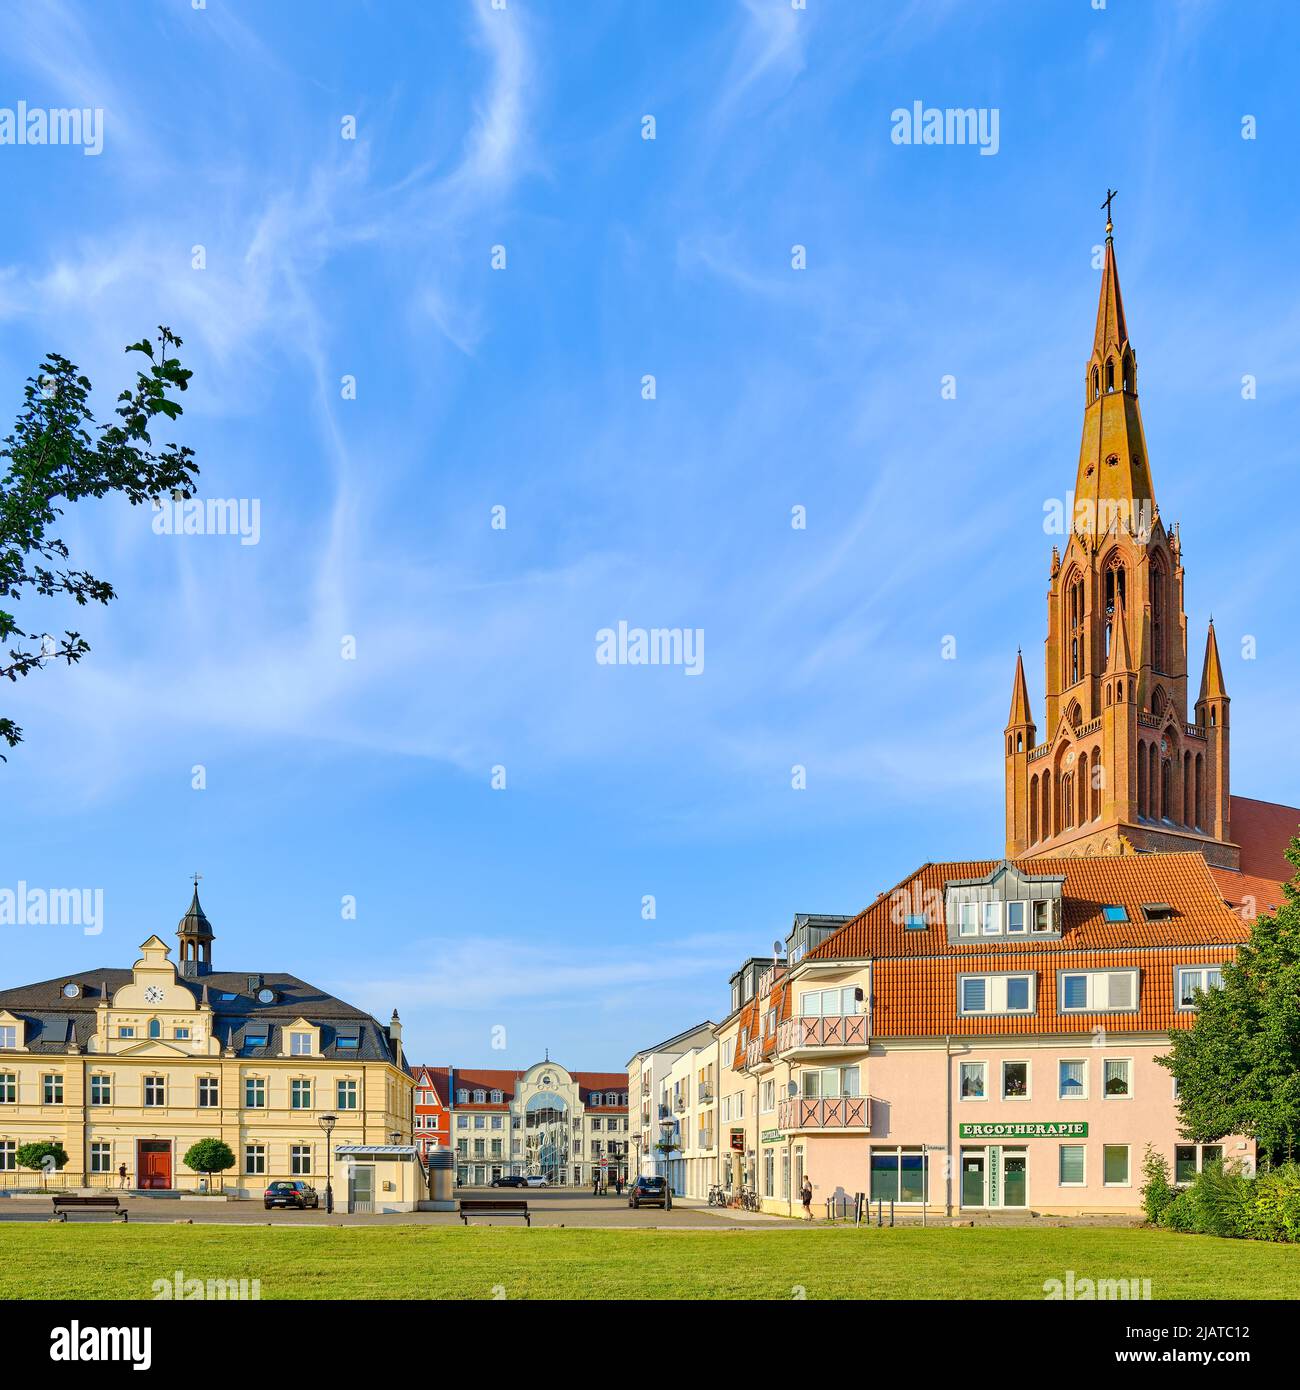 Hanseatic Town of Demmin, Mecklenburg-Western Pomerania, Germany, August 7, 2020: Town hall and Bartholomew's Church. Stock Photo